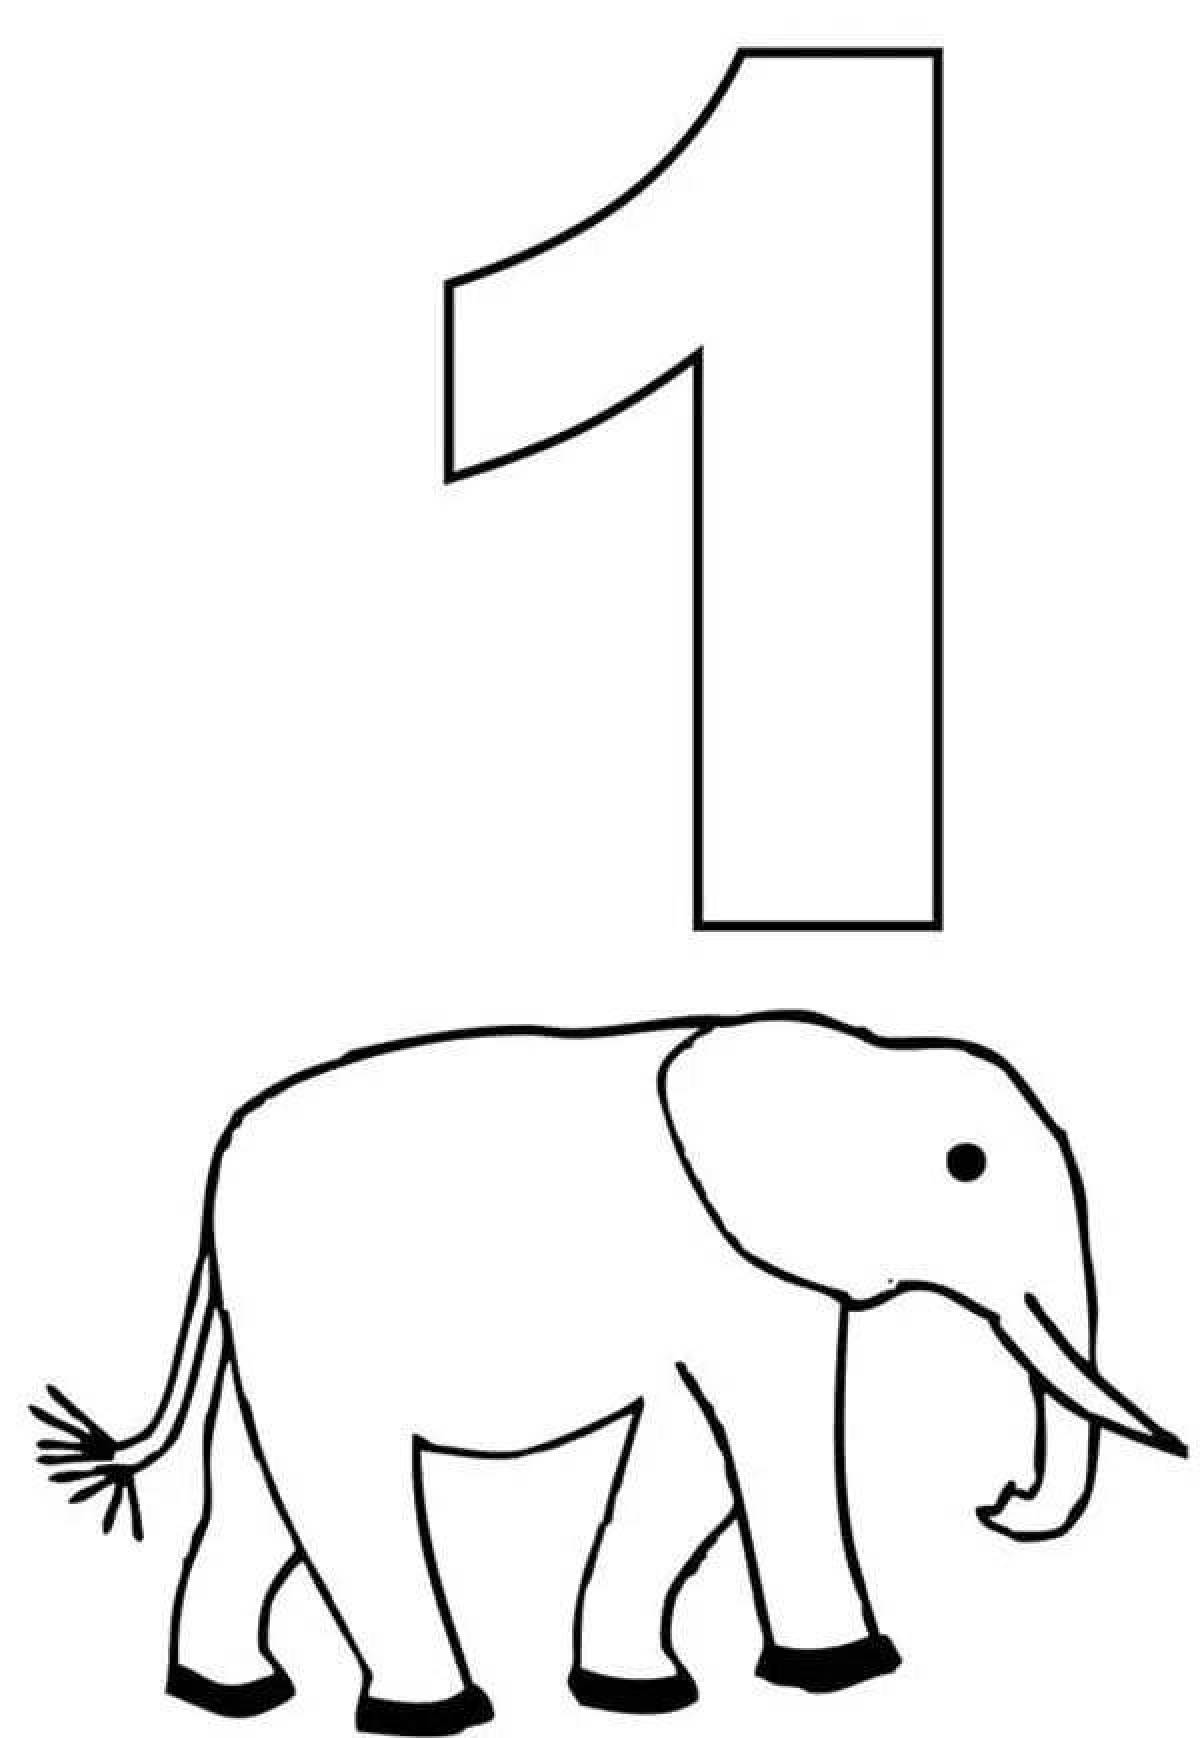 Shiny single number coloring page